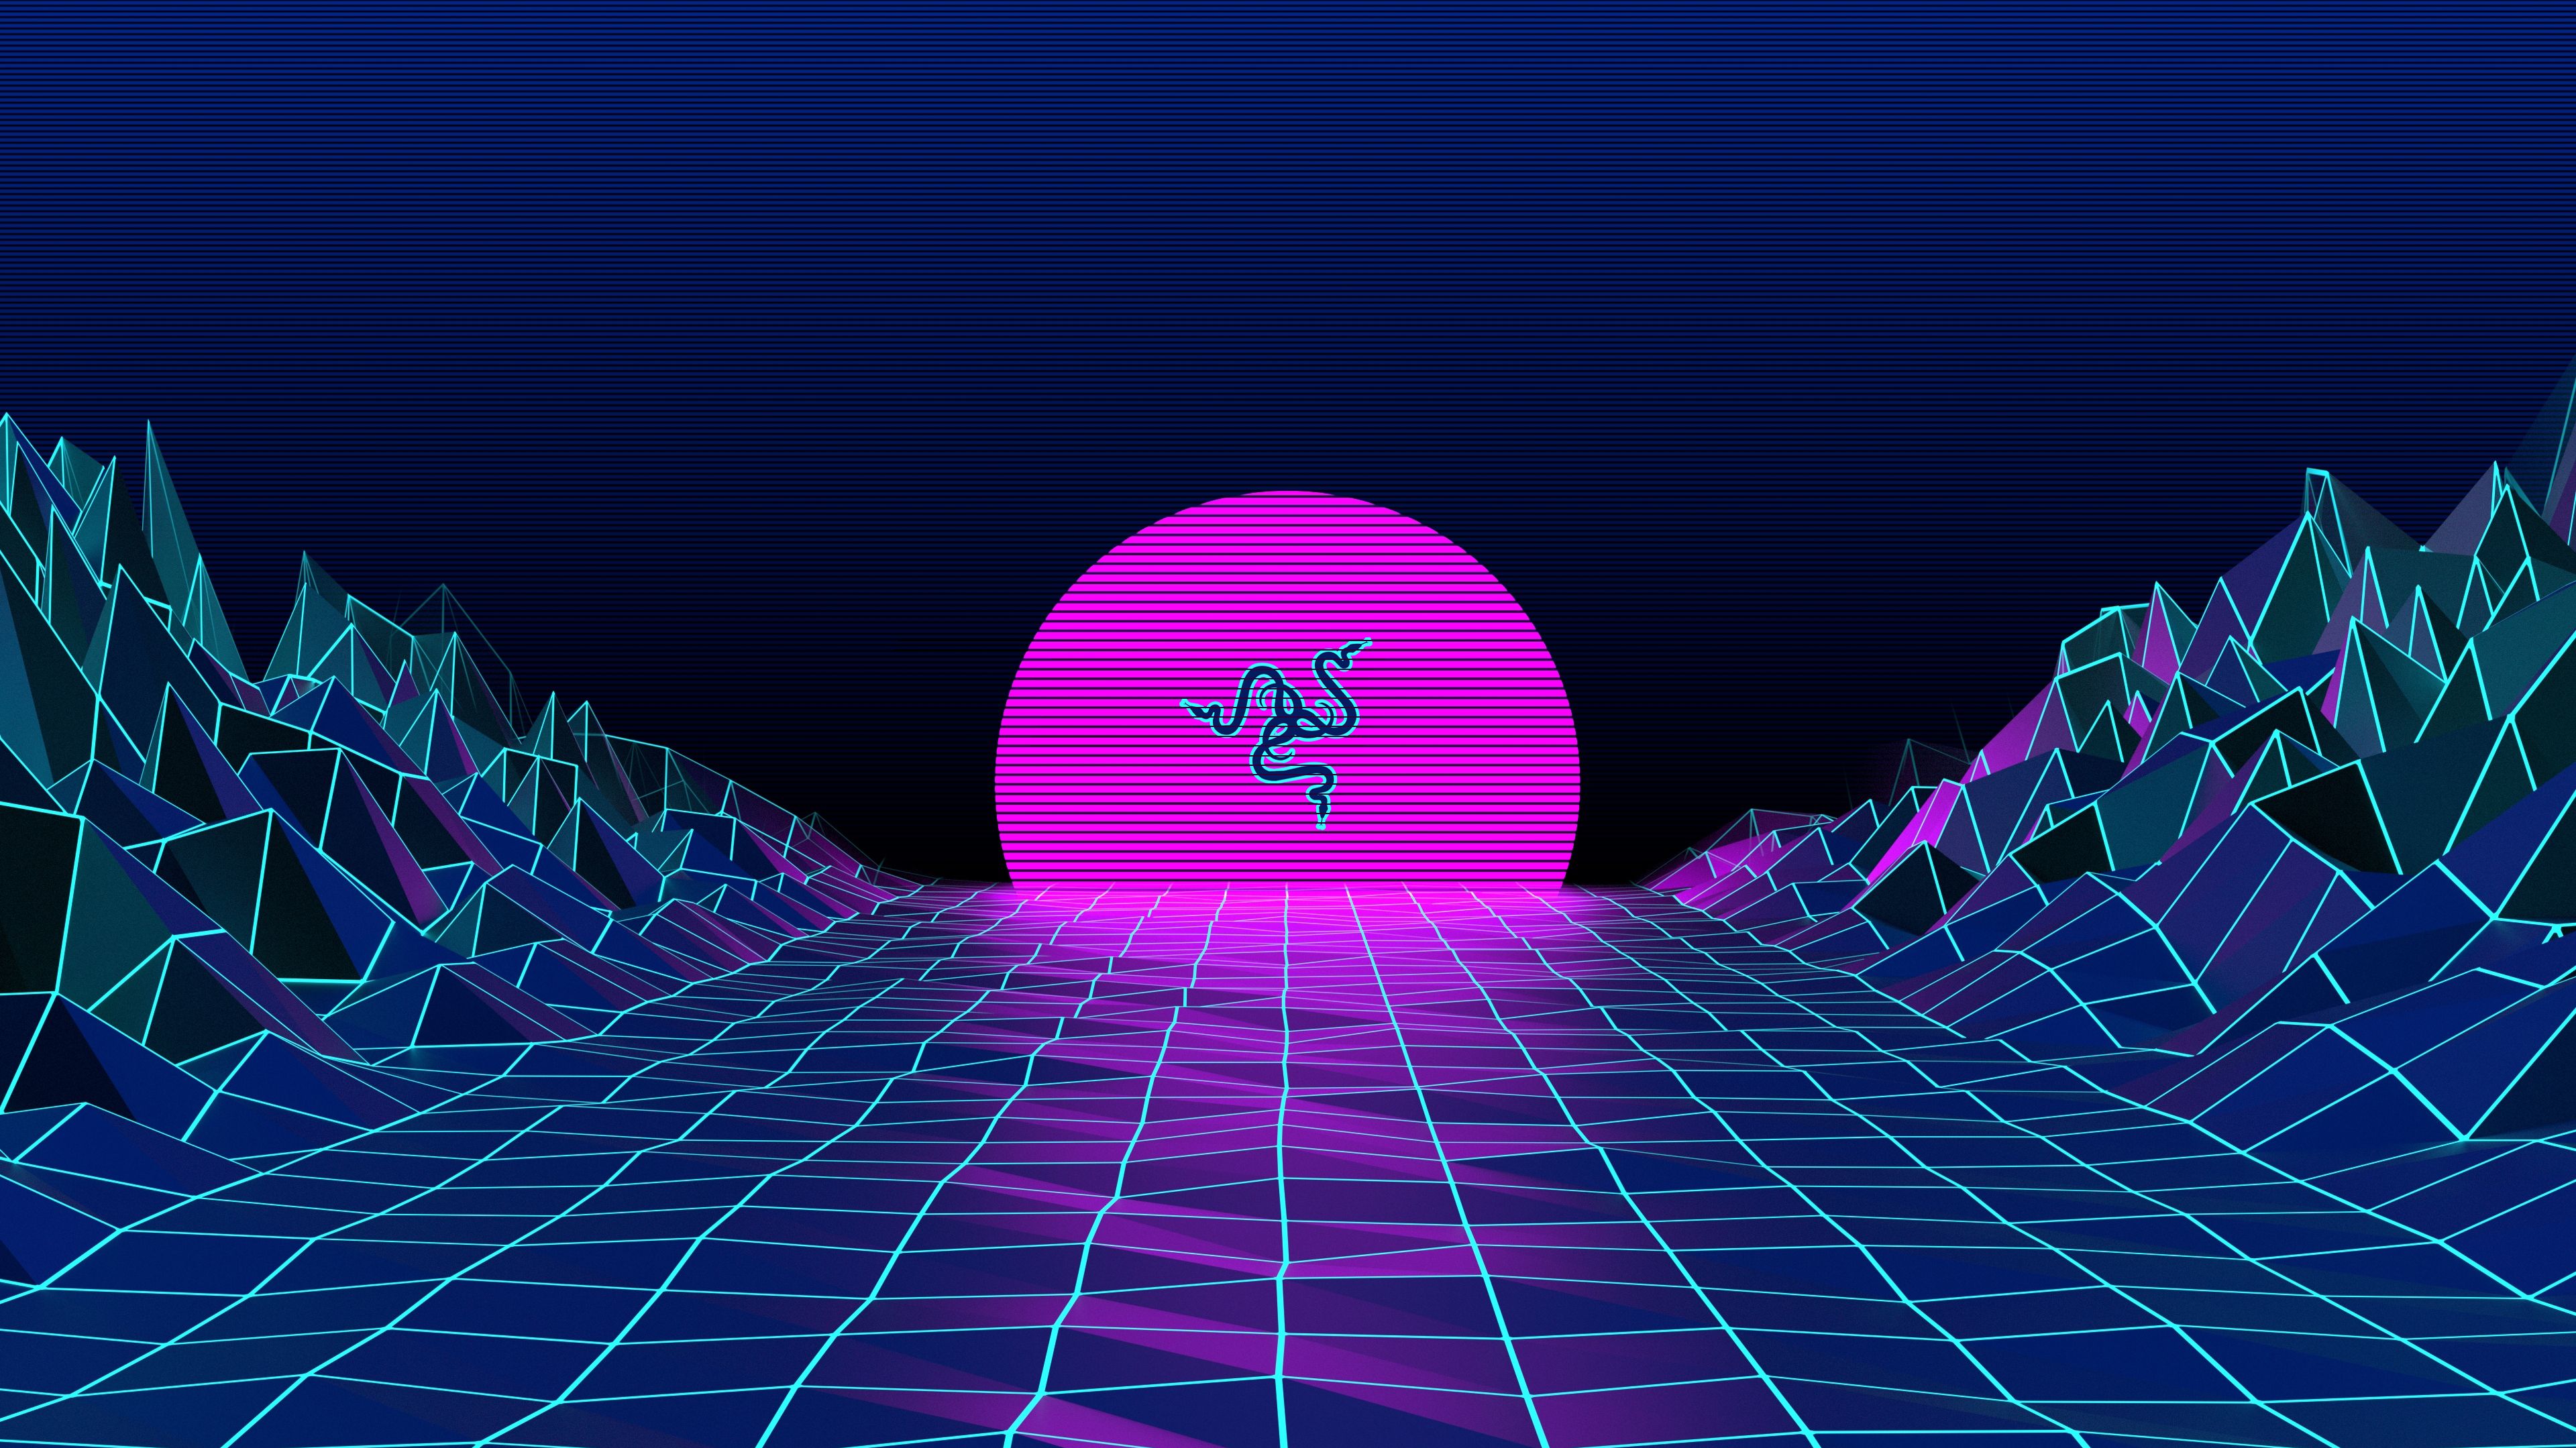 A simple 80's inspired edit by me!